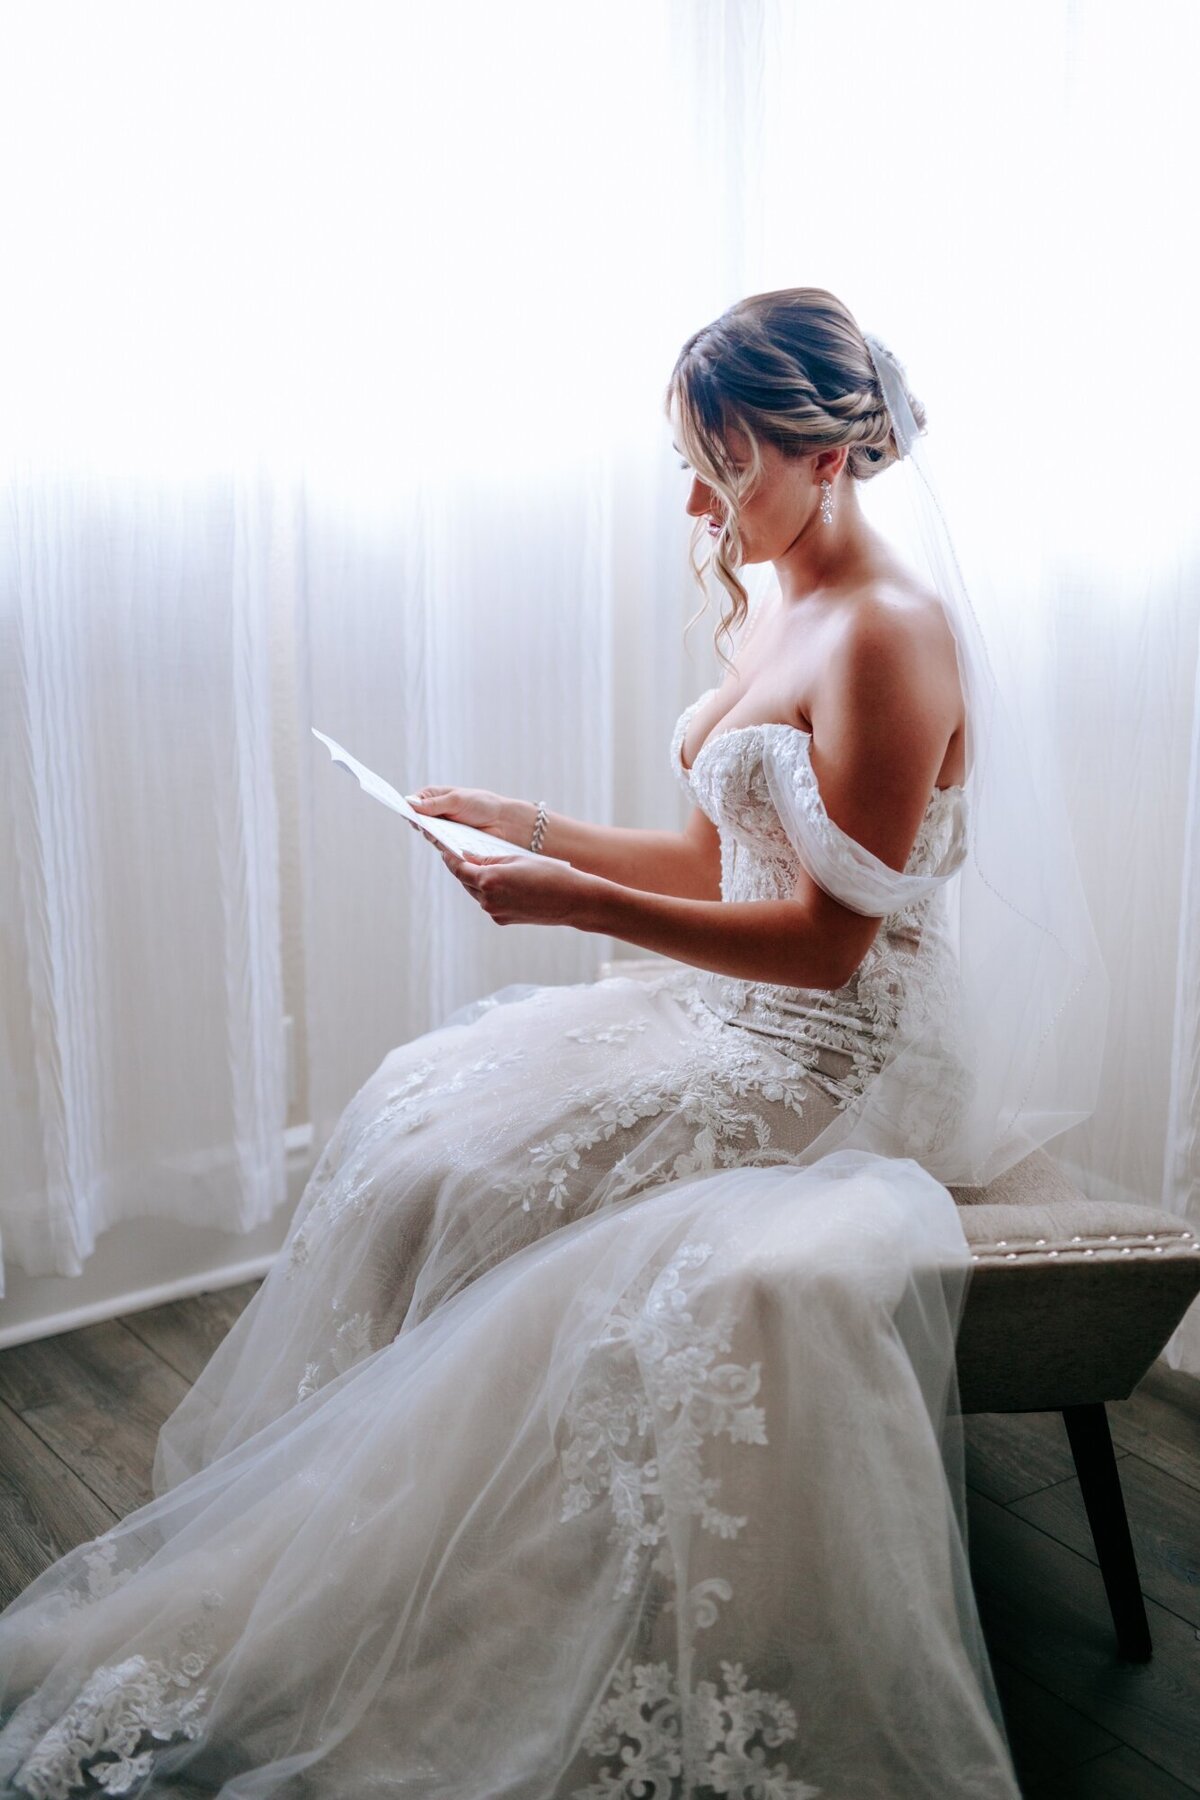 Bride reading a note from her husband in her suite before walking down the aisle.